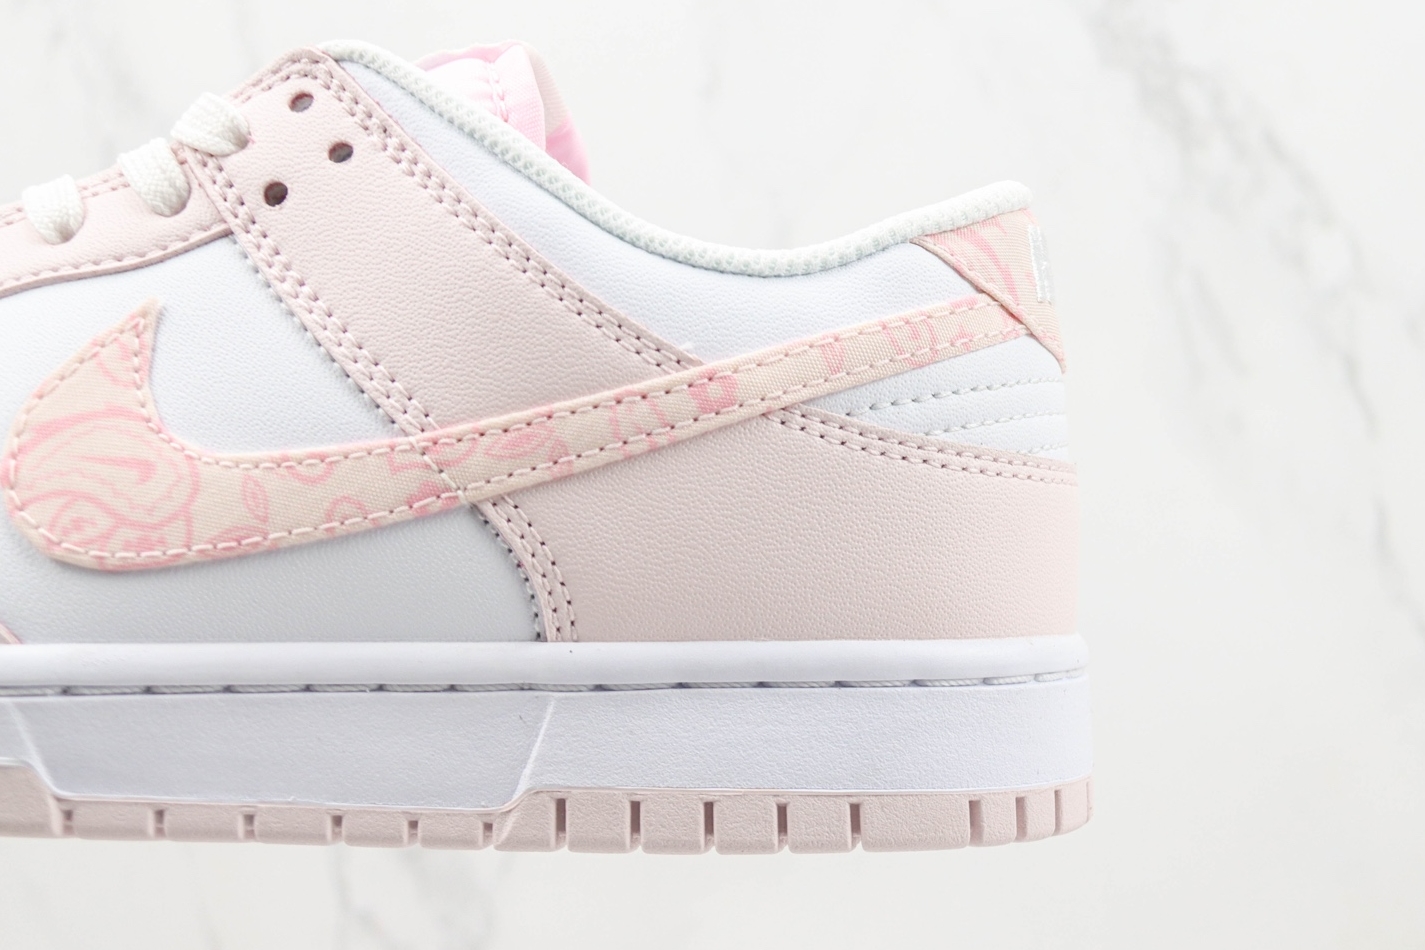 Nike SB Dunk Low Essential Paisley Pack Pink White FD1449-100 - Shop the Latest Collection at [Website Name]